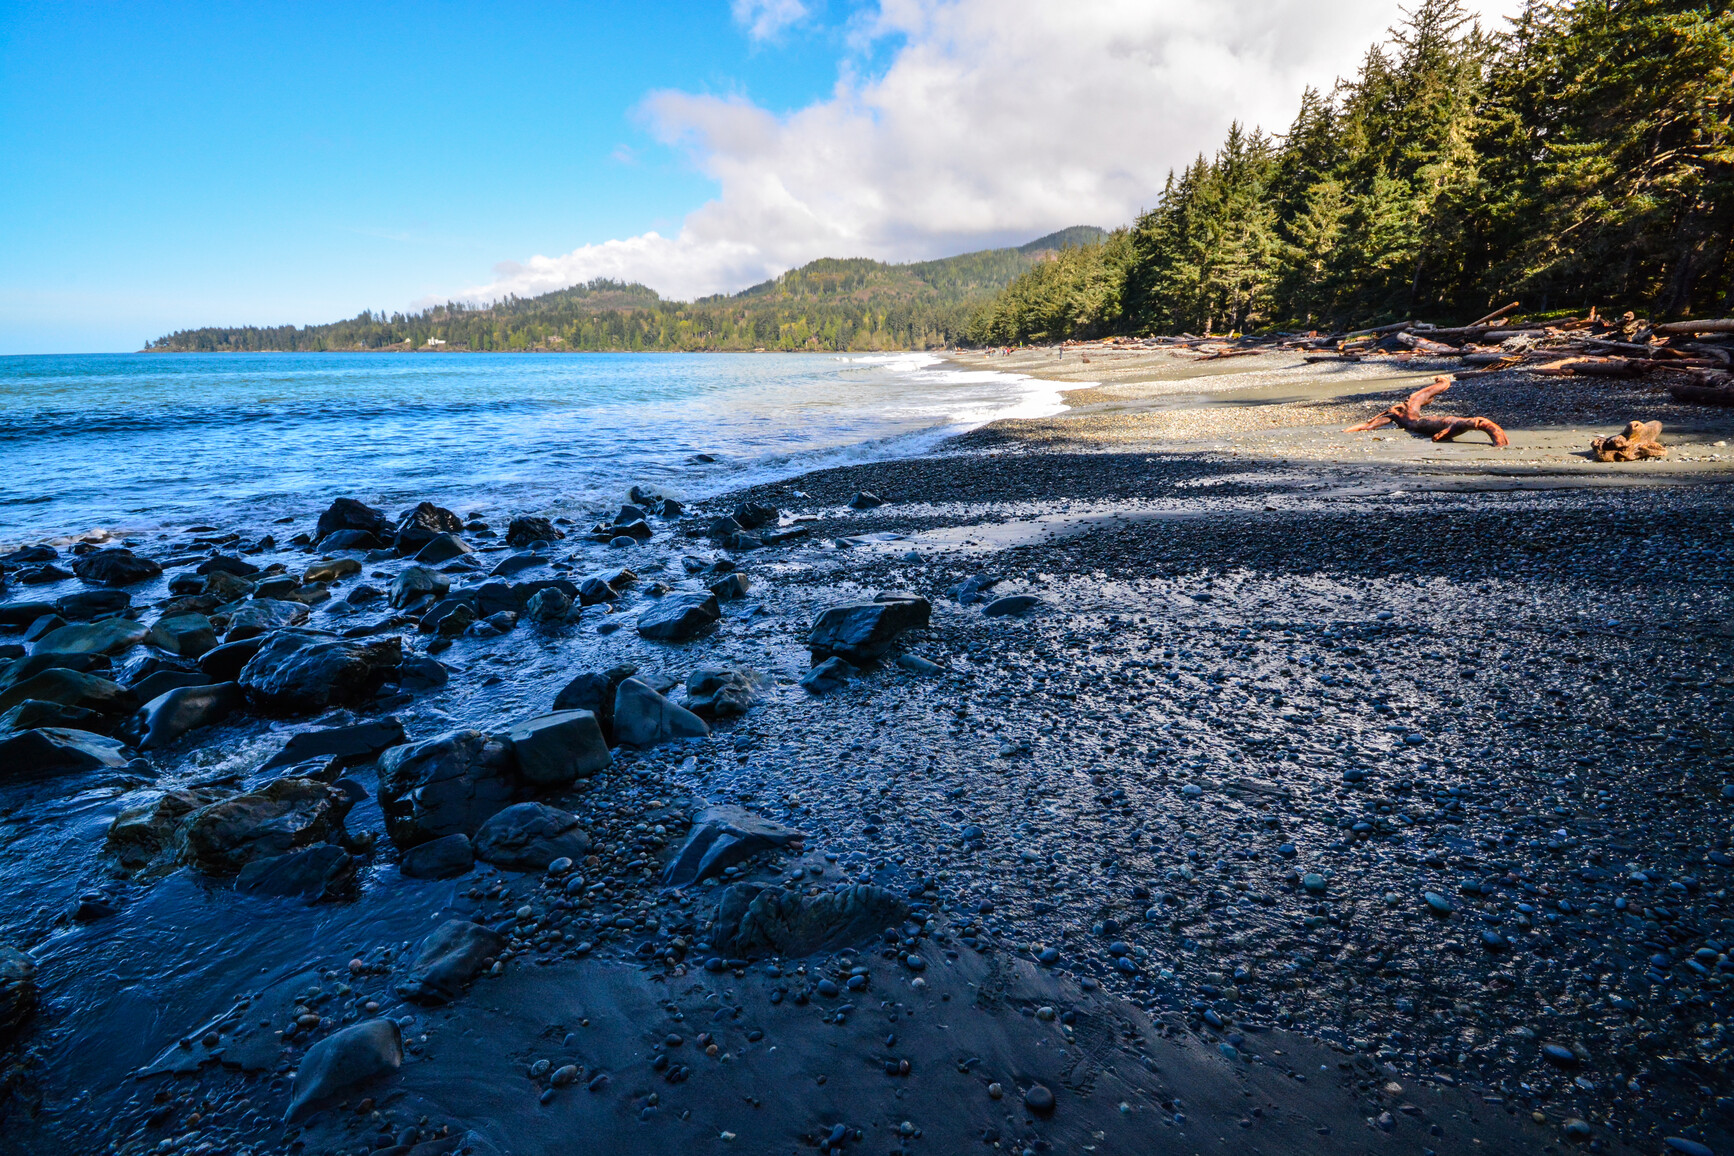 View of beach with rocks, mountains, forest.